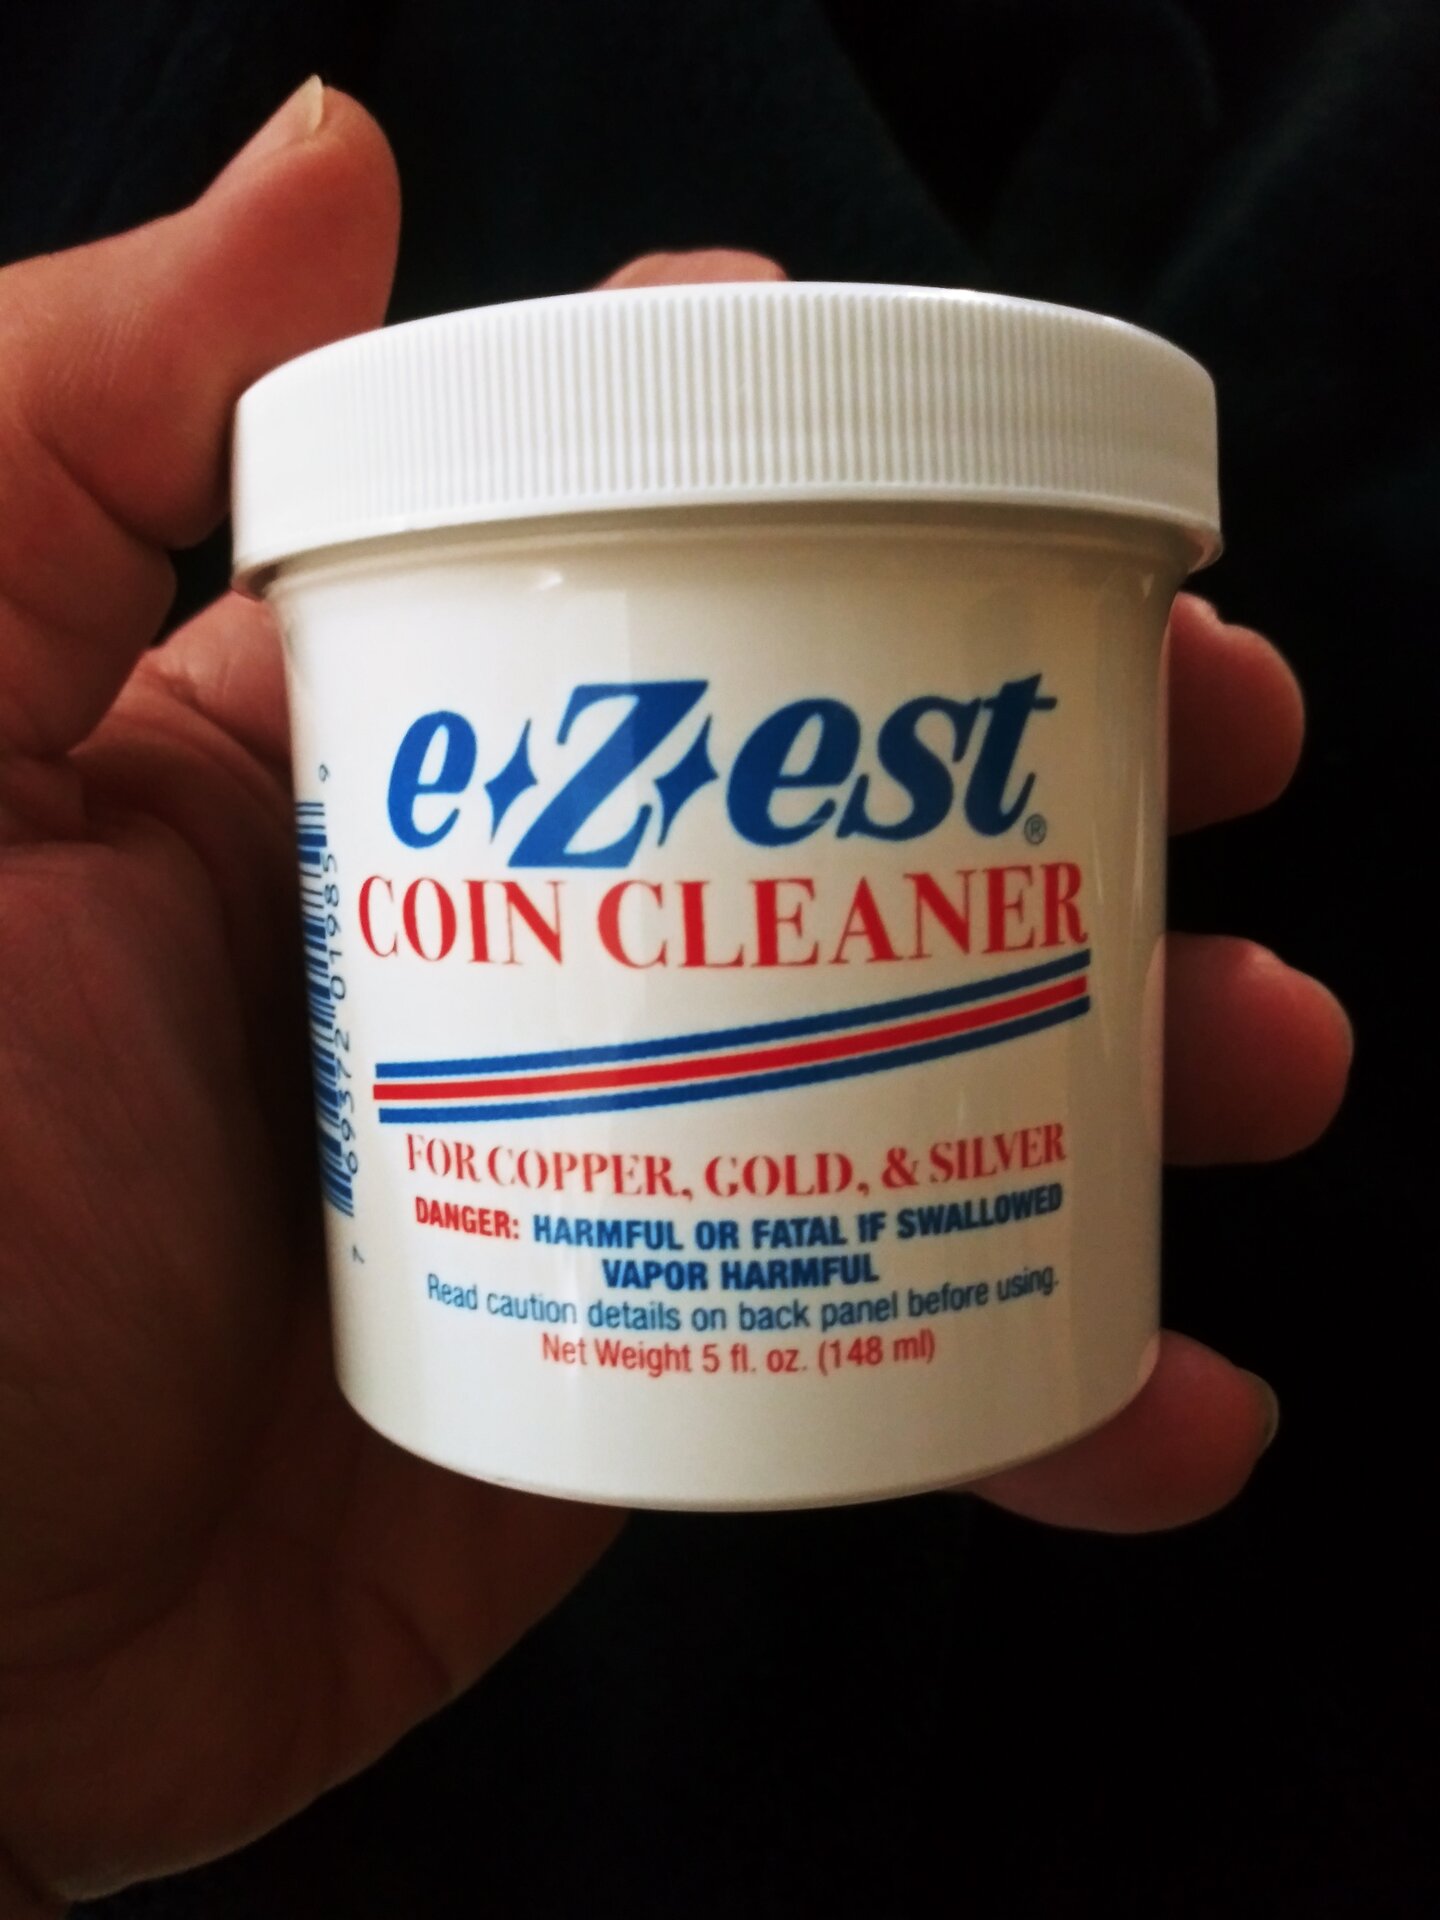  Coin Cleaner